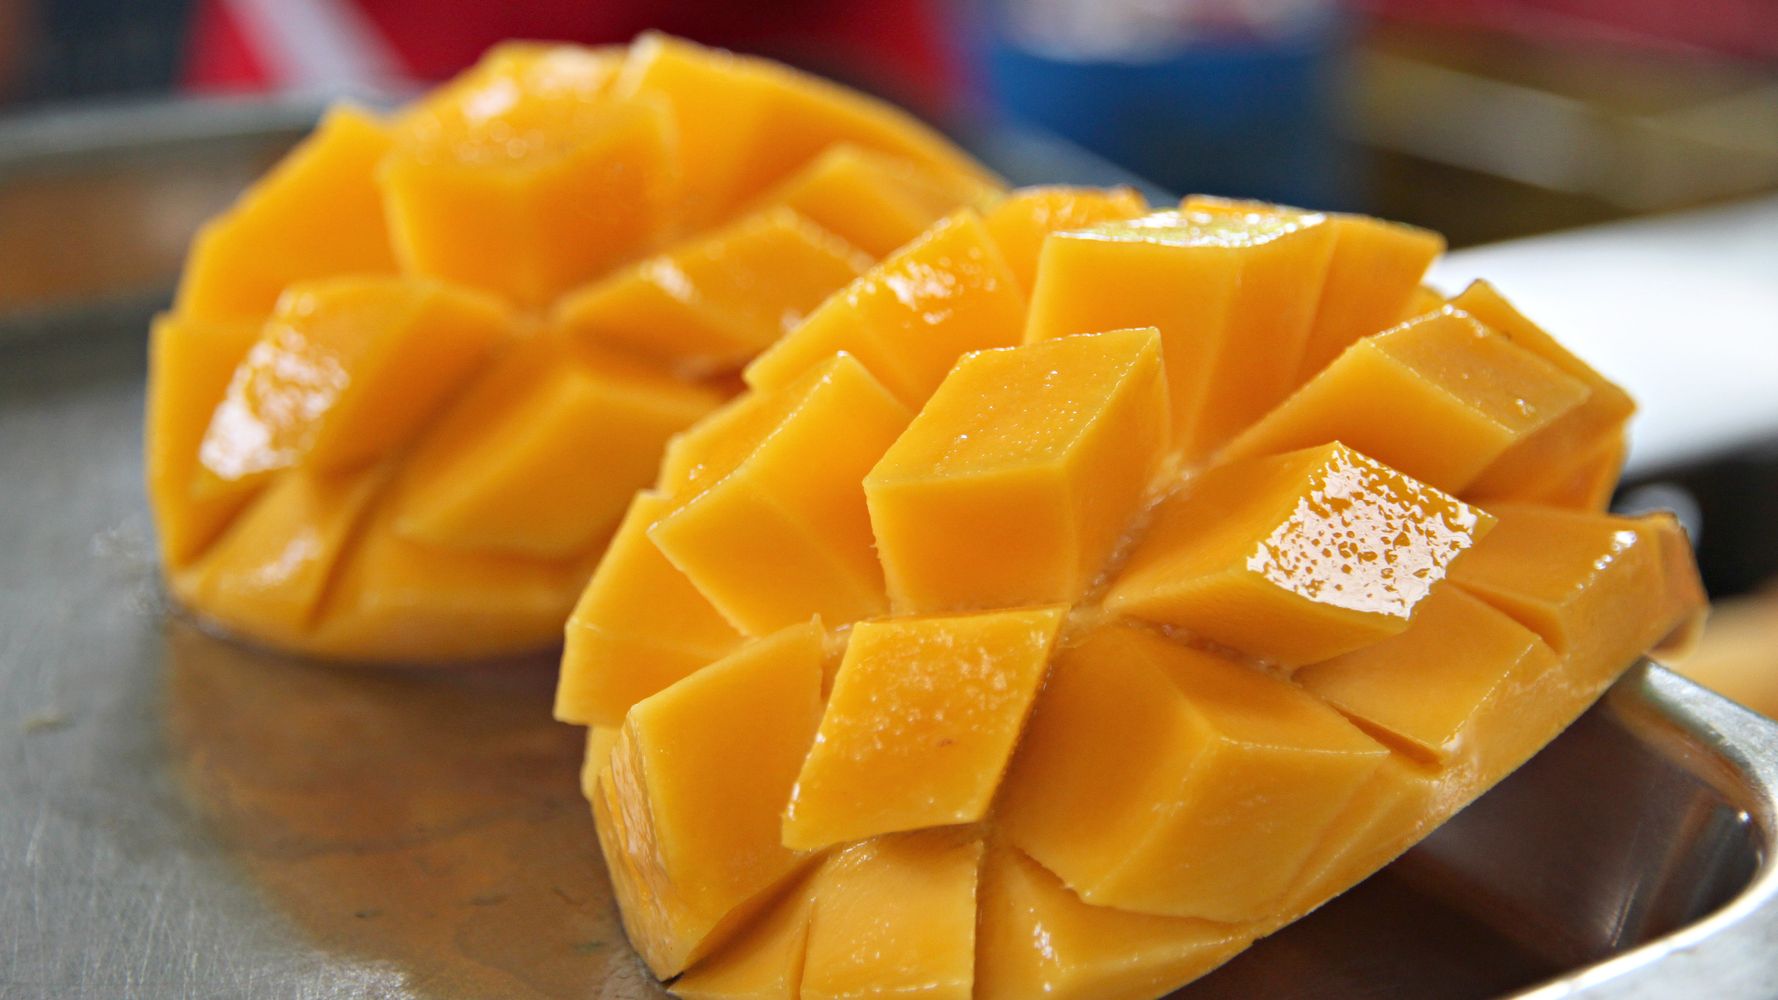 How To Cut A Mango 3 Easy Ways And 1 Crazy Impressive Way Huffpost Life,Educational Websites For Teachers